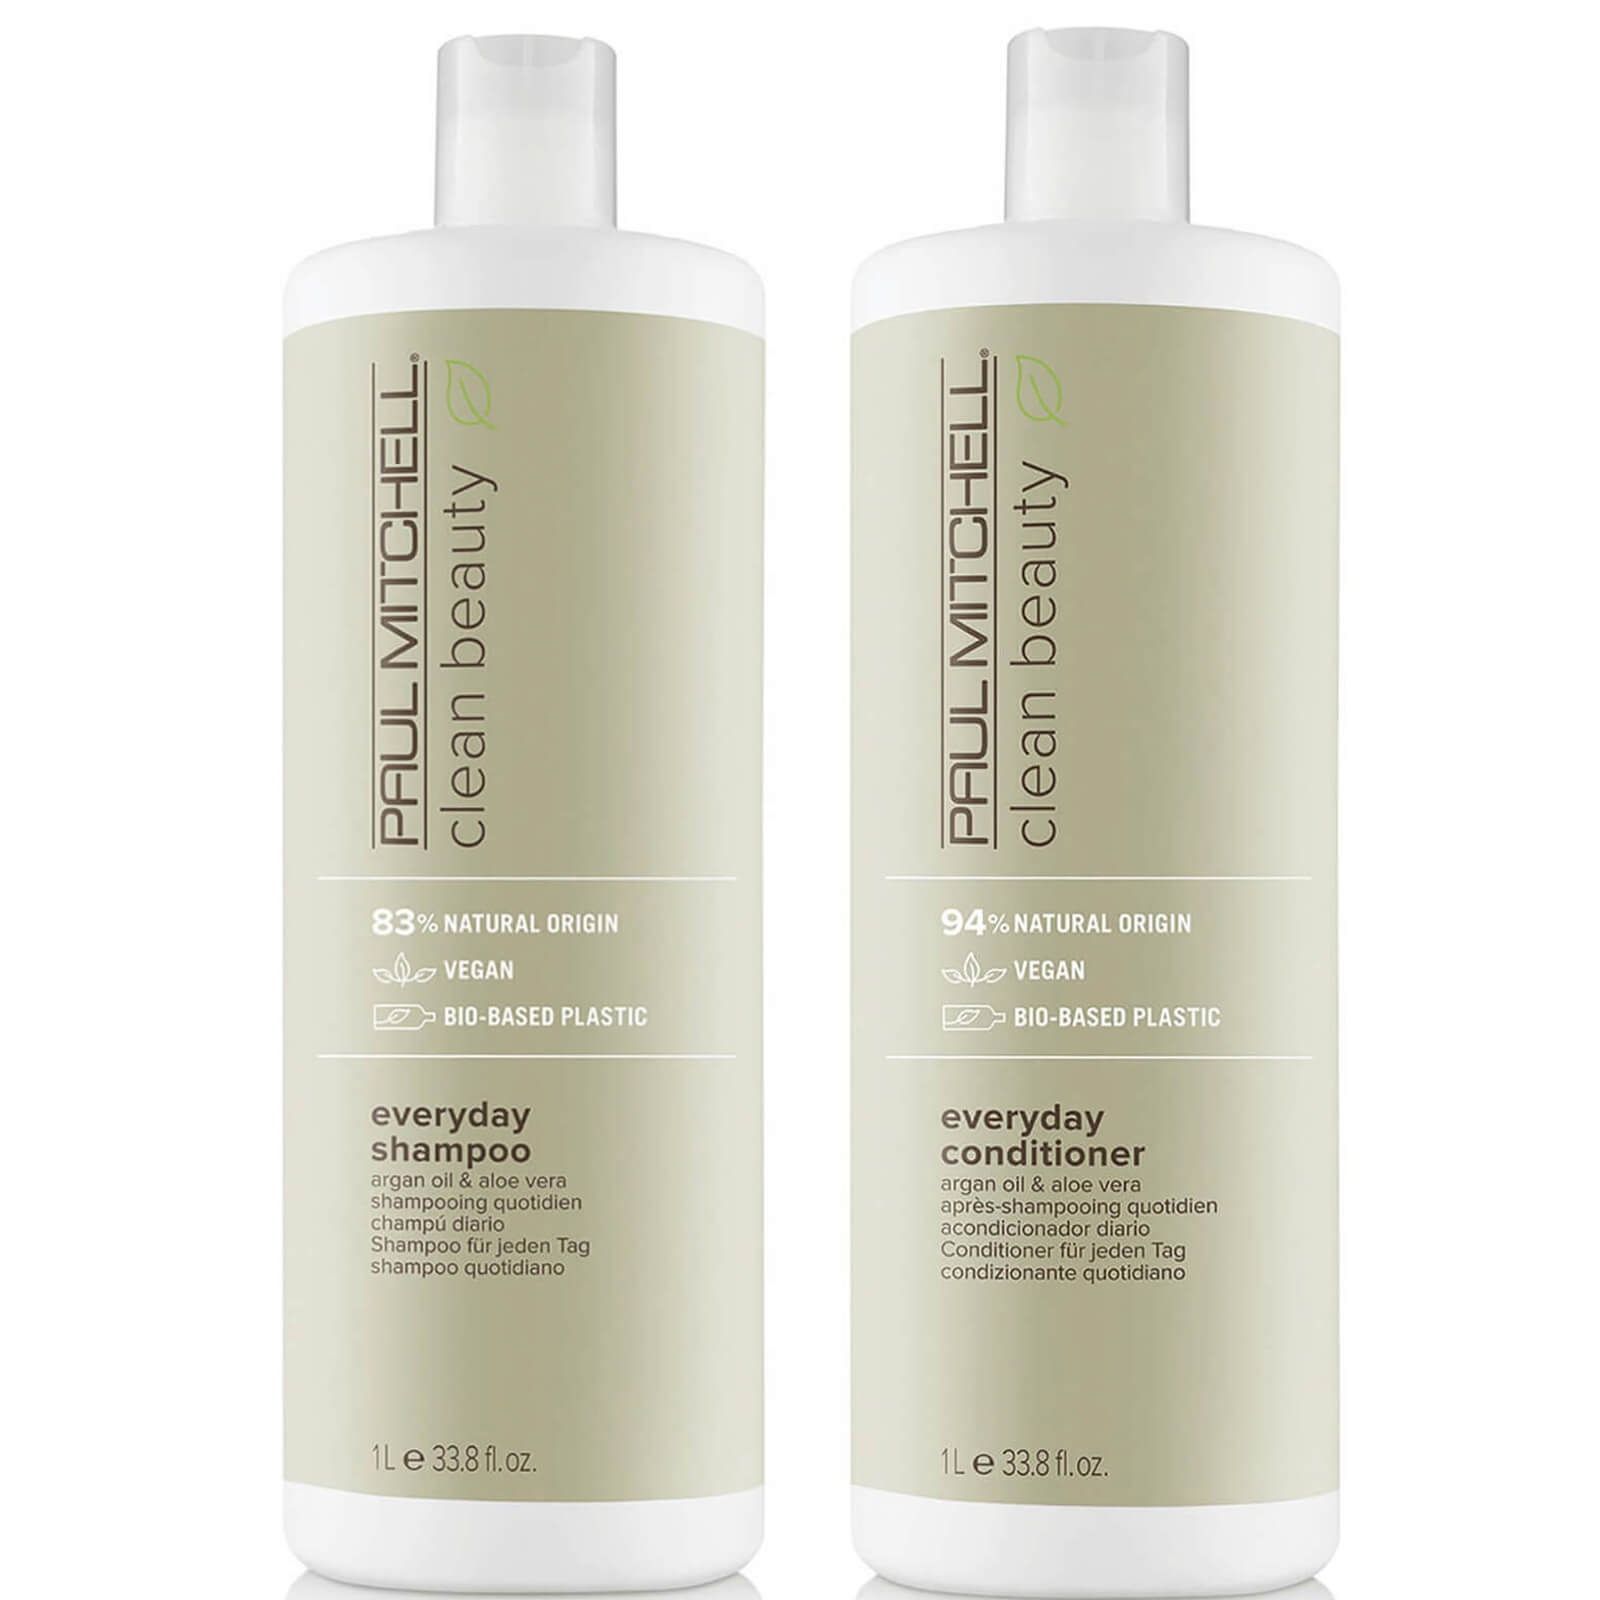 Paul Mitchell Clean Beauty Everyday Shampoo and Conditioner Supersize Set